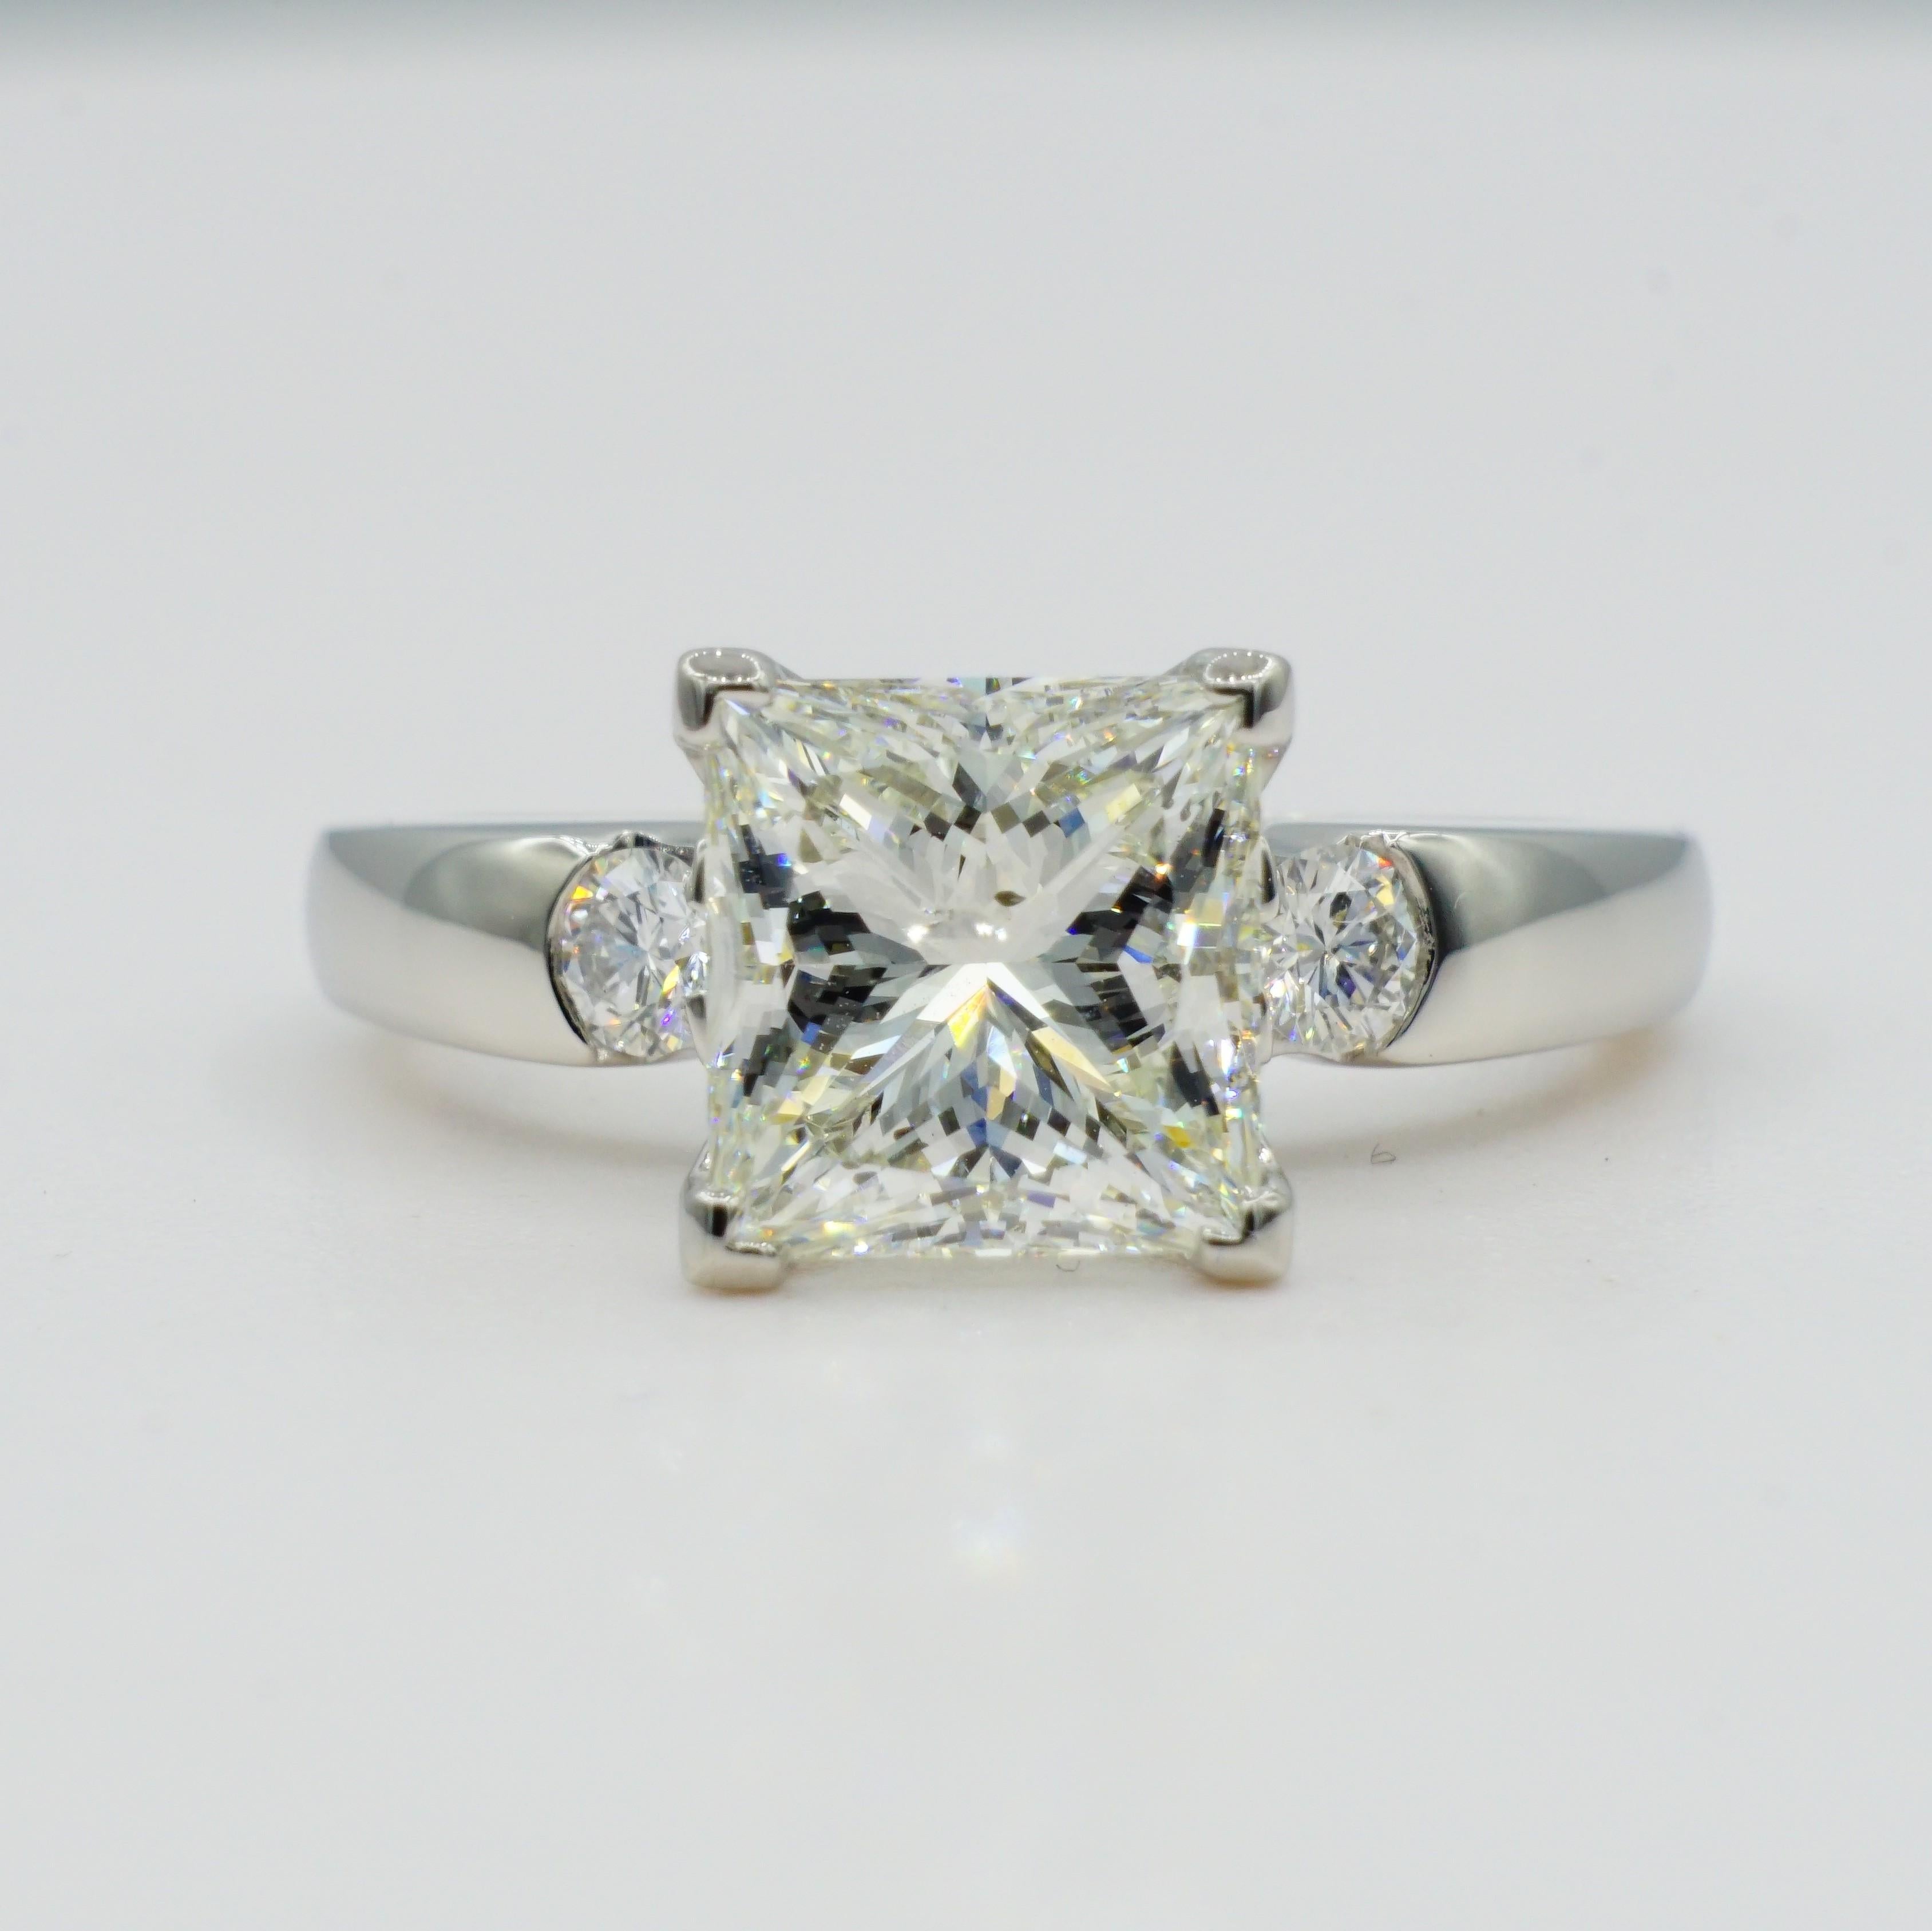 Platinum 3.06ct EGL Certified Princess Cut Diamond Wedding Set by Designer Rock N Gold Creations. This beautifully cut princess cut diamond center stone is H in color and SI2 in clarity and set in a four-prong chevron setting by our experienced